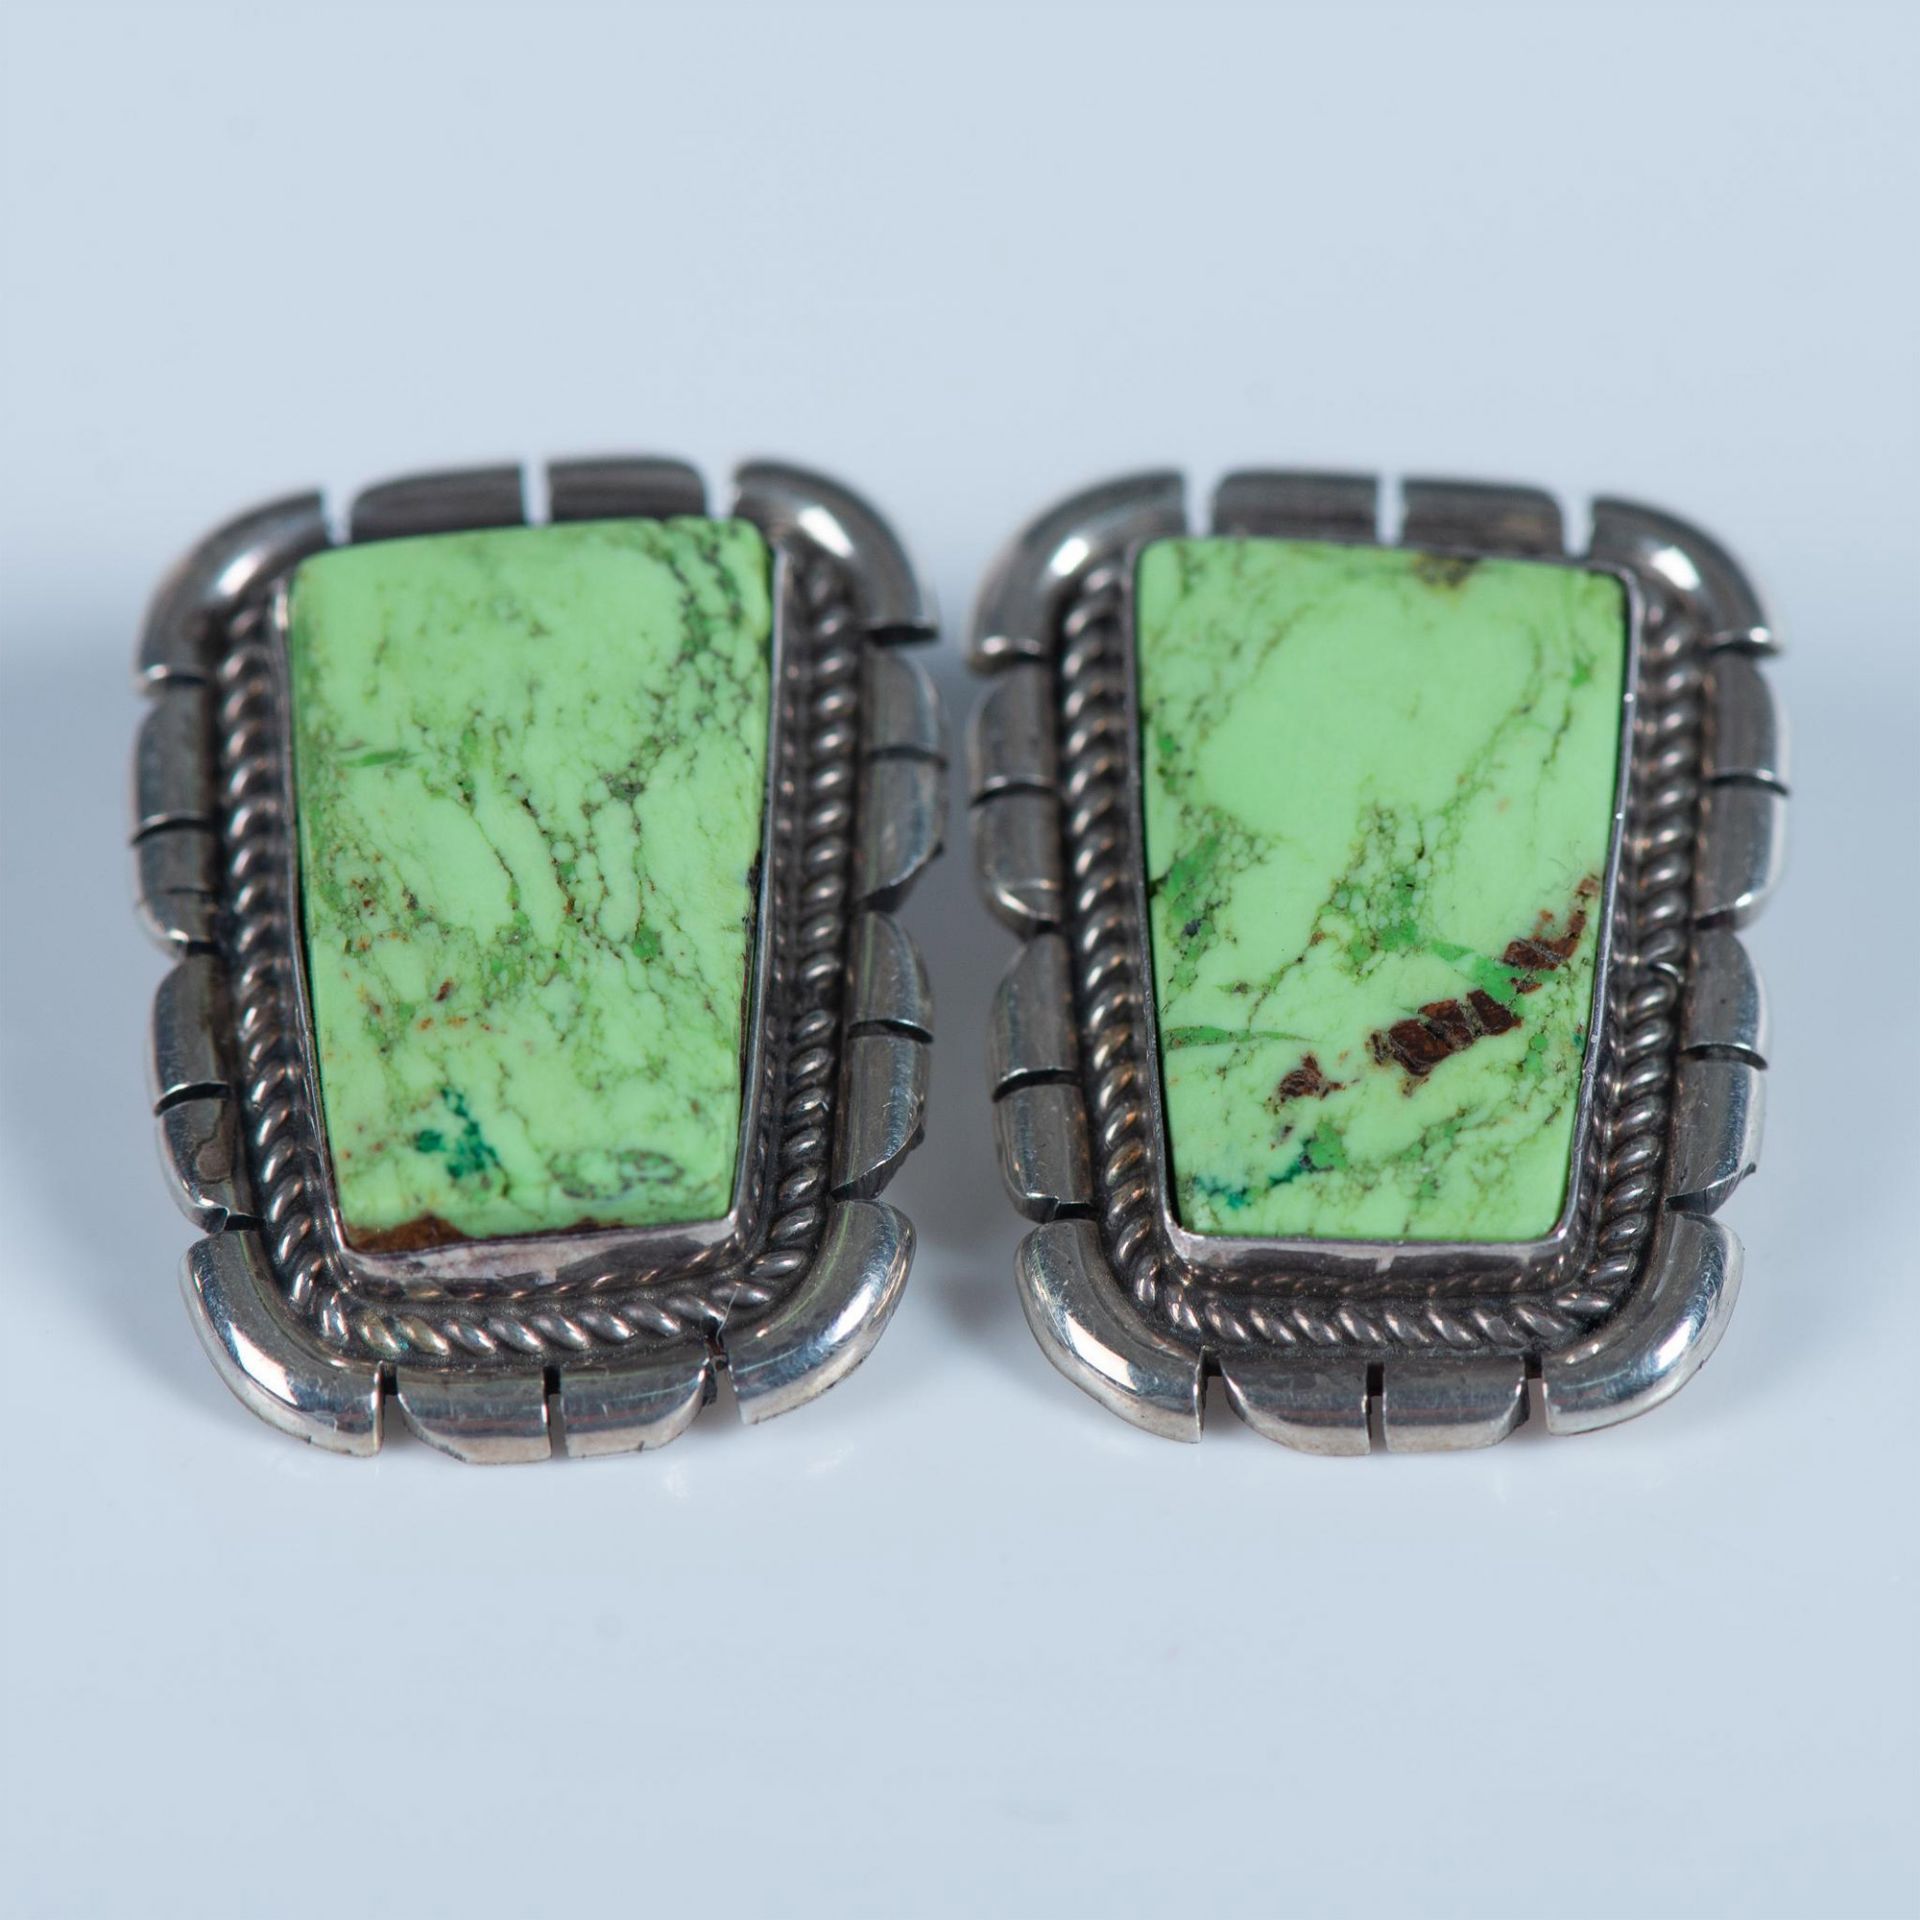 2 Pairs of Sterling Silver and Gaspeite Earrings - Image 3 of 4